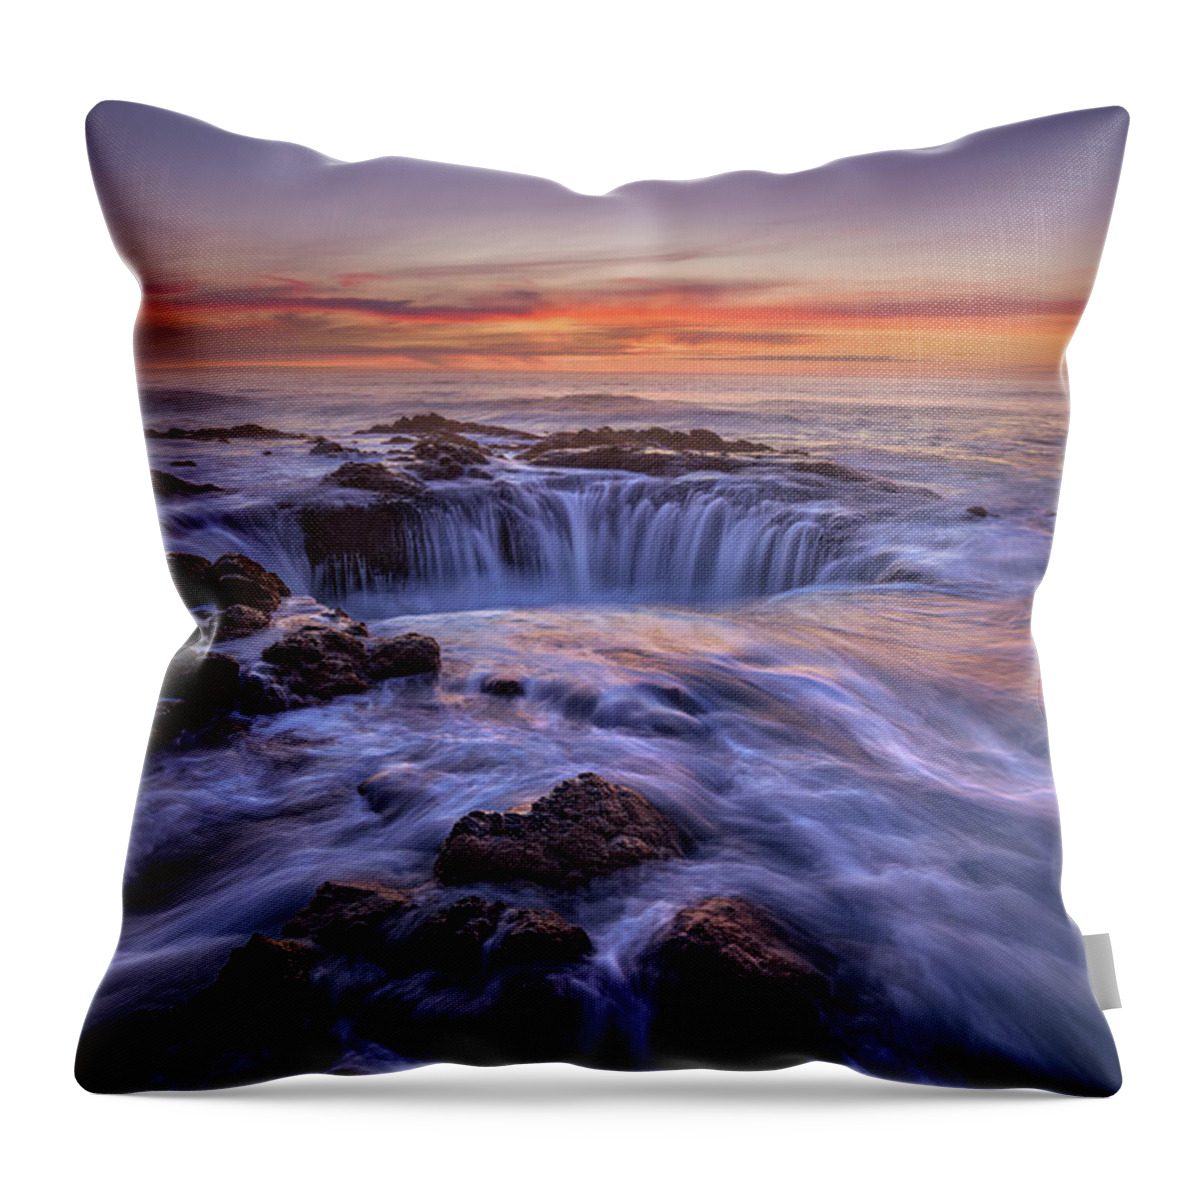 Oregon Coast Throw Pillow featuring the photograph Thor's Well At Sunset by Chris Steele